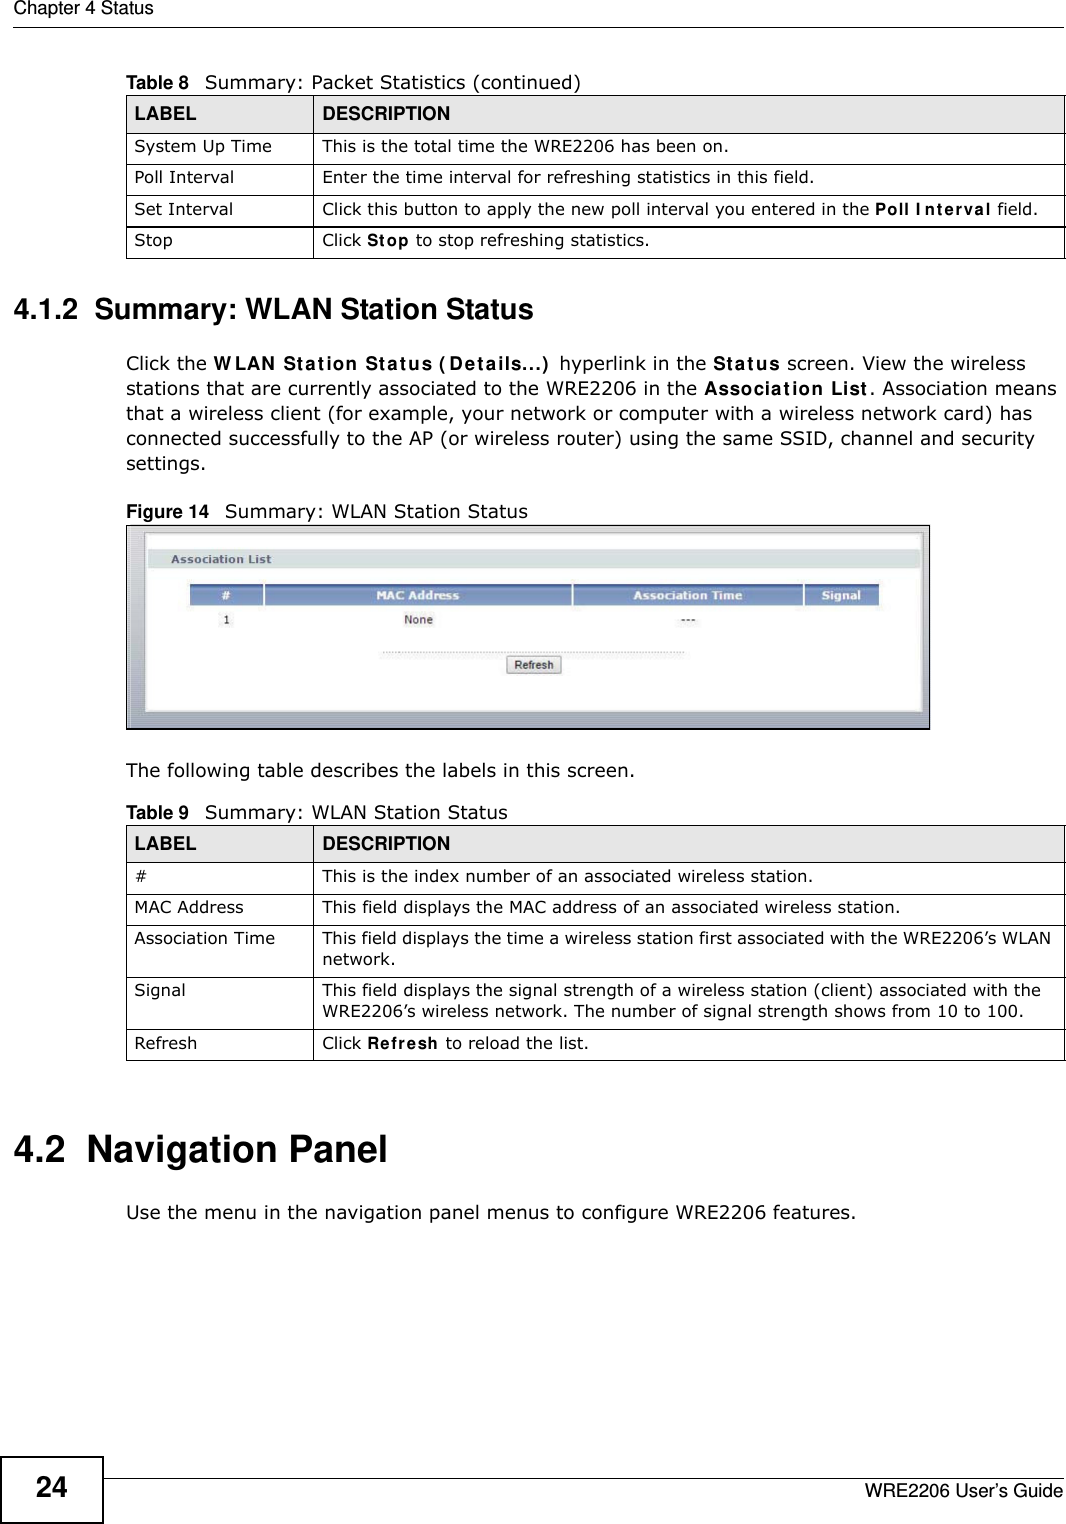 Chapter 4 StatusWRE2206 User’s Guide244.1.2  Summary: WLAN Station Status     Click the W LAN St a t ion Stat us ( D et a ils...)  hyperlink in the St a t u s screen. View the wireless stations that are currently associated to the WRE2206 in the Associa t ion List. Association means that a wireless client (for example, your network or computer with a wireless network card) has connected successfully to the AP (or wireless router) using the same SSID, channel and security settings.Figure 14   Summary: WLAN Station StatusThe following table describes the labels in this screen.4.2  Navigation PanelUse the menu in the navigation panel menus to configure WRE2206 features.System Up Time This is the total time the WRE2206 has been on.Poll Interval Enter the time interval for refreshing statistics in this field.Set Interval Click this button to apply the new poll interval you entered in the Poll I nt er val field.Stop Click St op to stop refreshing statistics.Table 8   Summary: Packet Statistics (continued)LABEL DESCRIPTIONTable 9   Summary: WLAN Station StatusLABEL DESCRIPTION#  This is the index number of an associated wireless station. MAC Address  This field displays the MAC address of an associated wireless station.Association Time This field displays the time a wireless station first associated with the WRE2206’s WLAN network.Signal This field displays the signal strength of a wireless station (client) associated with the WRE2206’s wireless network. The number of signal strength shows from 10 to 100.Refresh Click Refresh to reload the list. 